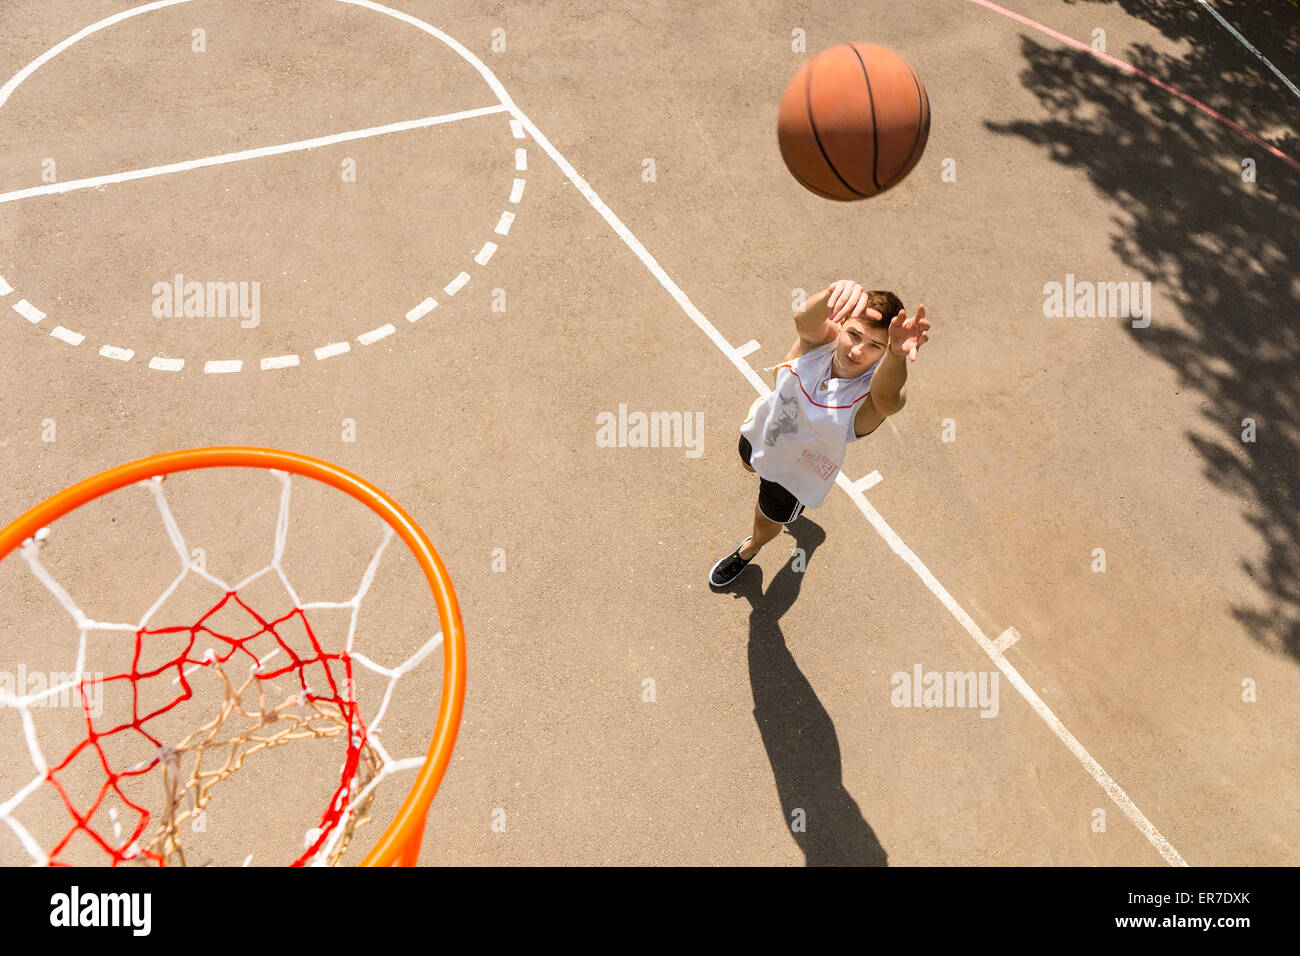 High Angle View of Young Man Playing Basketball, View from Above Hoop of Man Shooting Basketball Stock Photo